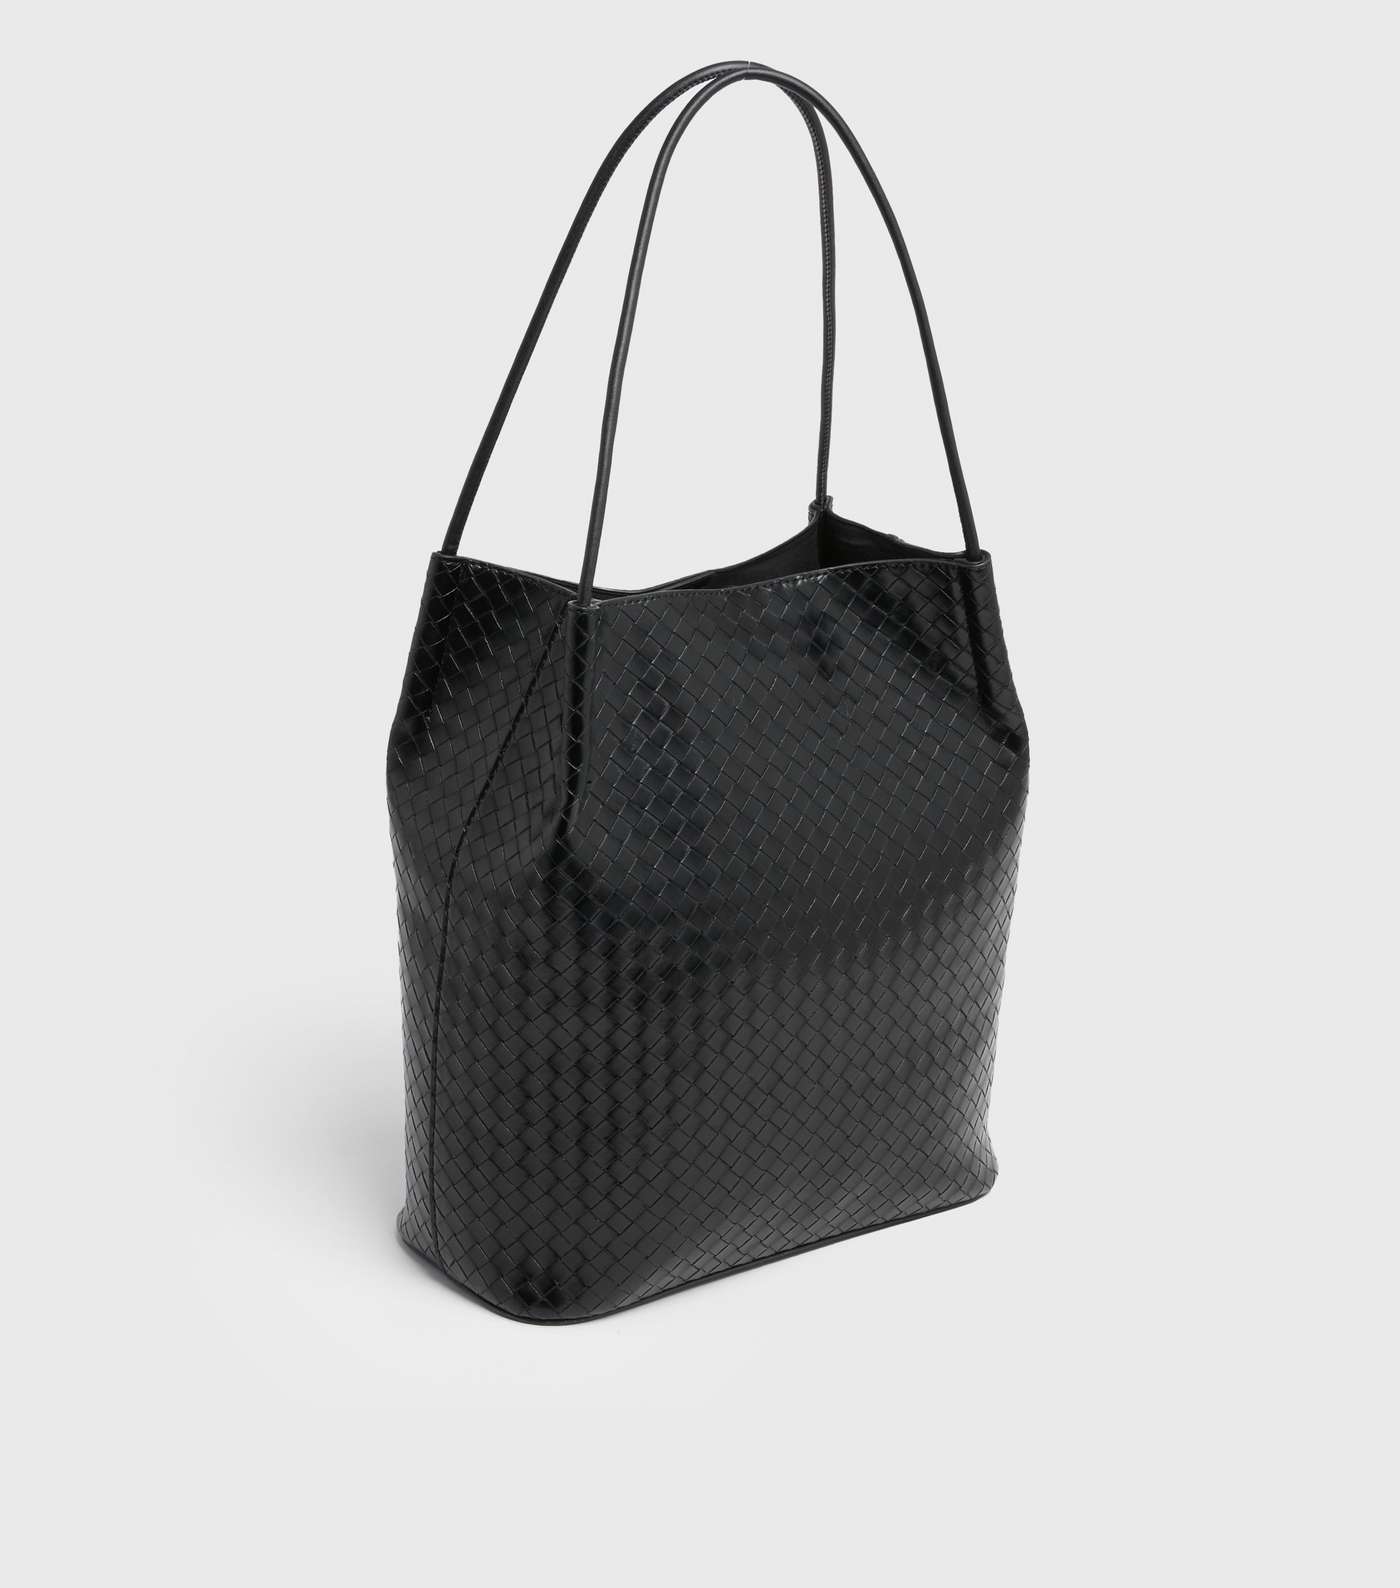 Black Leather-Look Woven Tote Bag Image 4